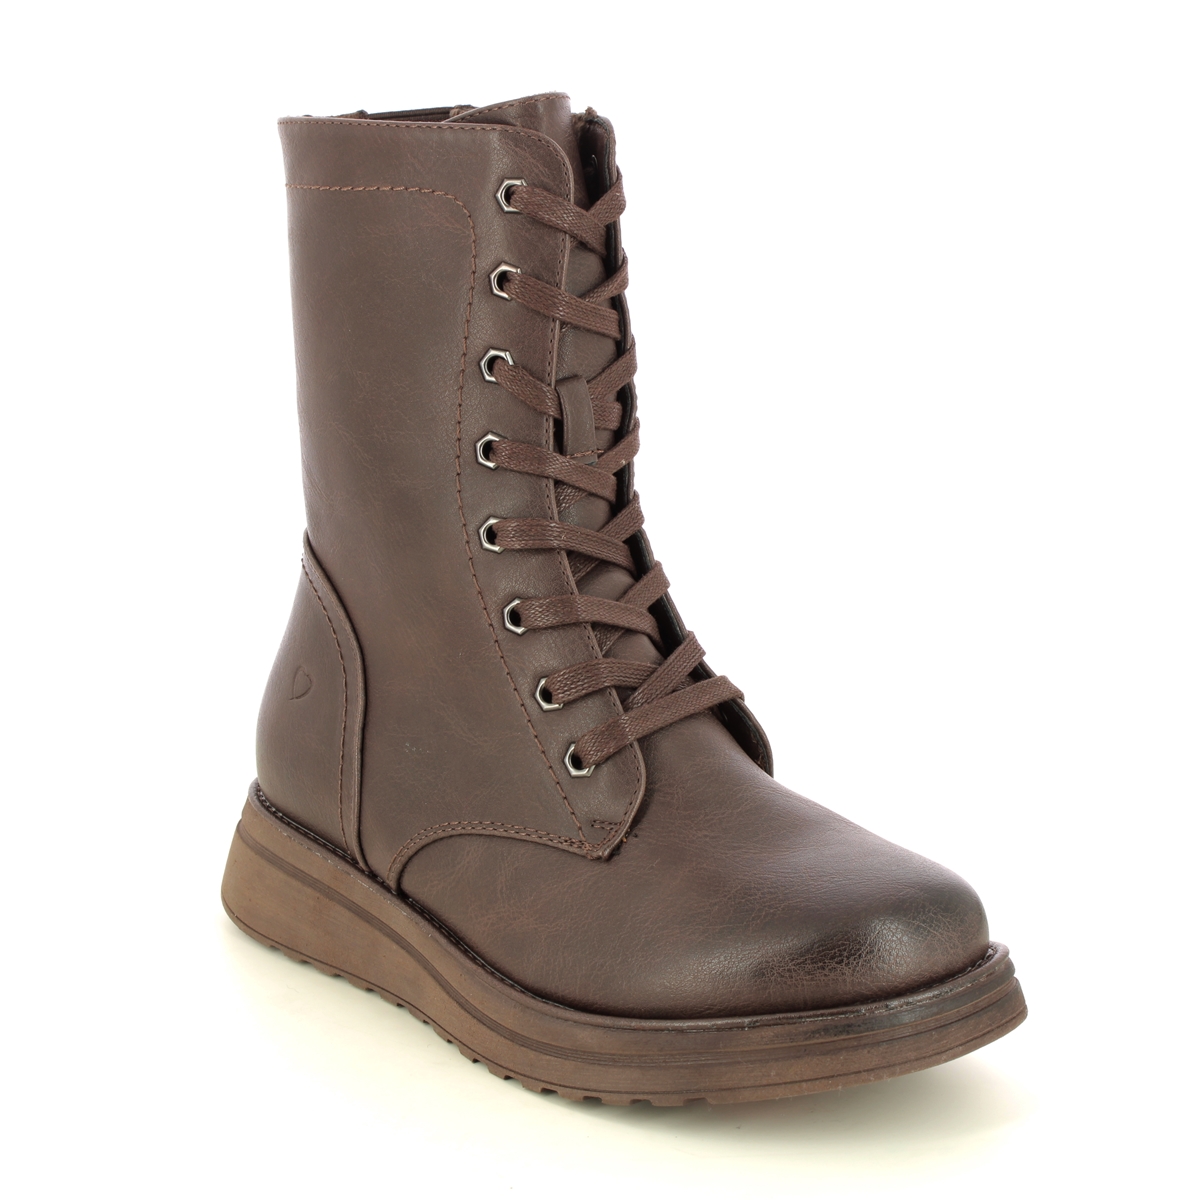 Heavenly Feet Martina Walker Chocolate brown Womens Lace Up Boots 3509-27 in a Plain Man-made in Size 3